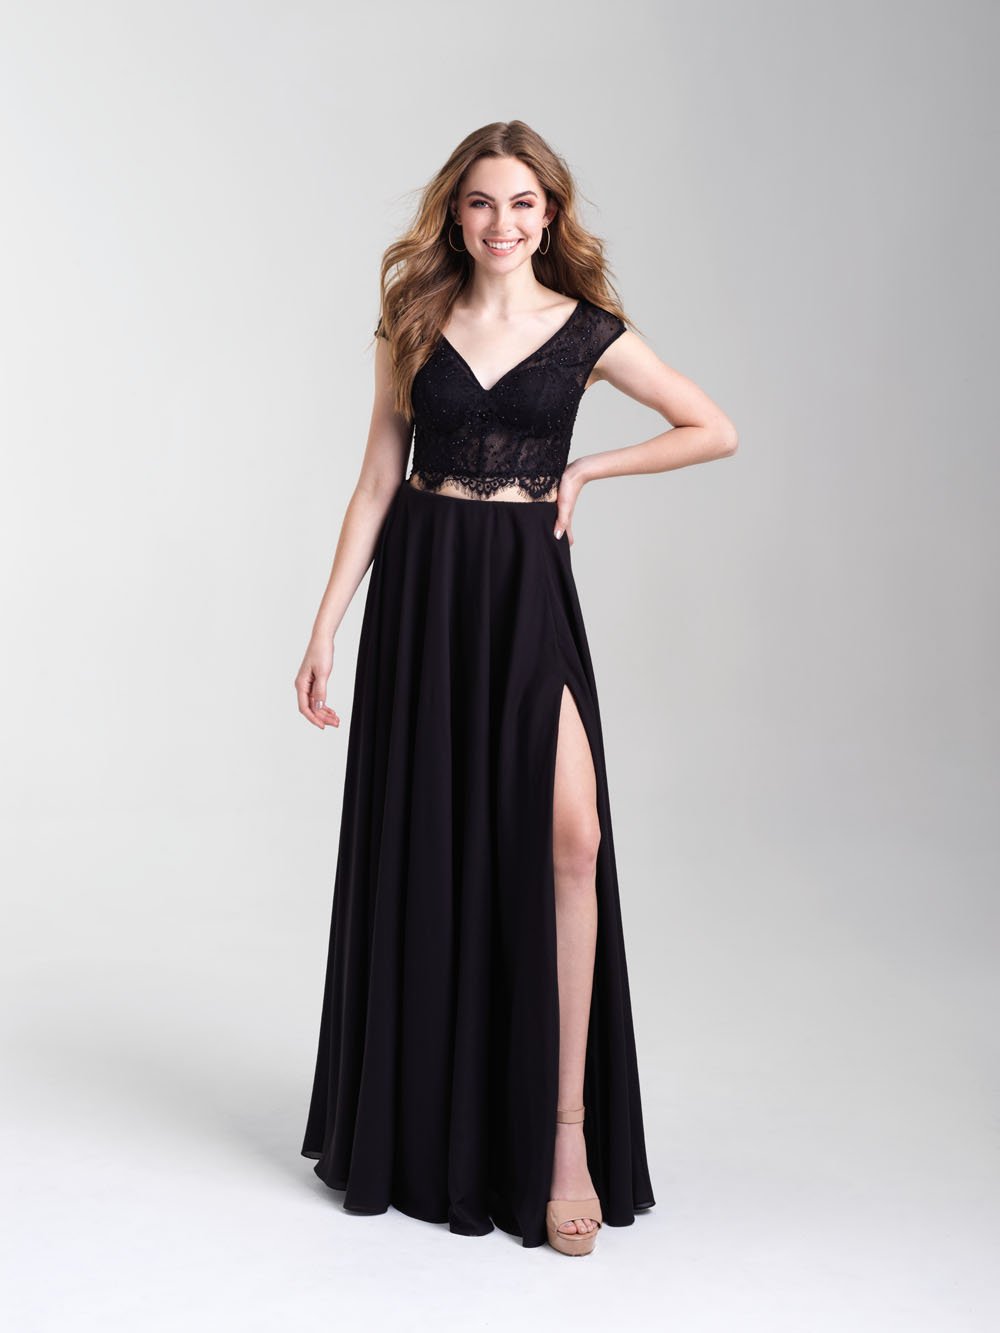 Madison James 20-377 dress images in these colors: Black, Royal, Red, Emerald.